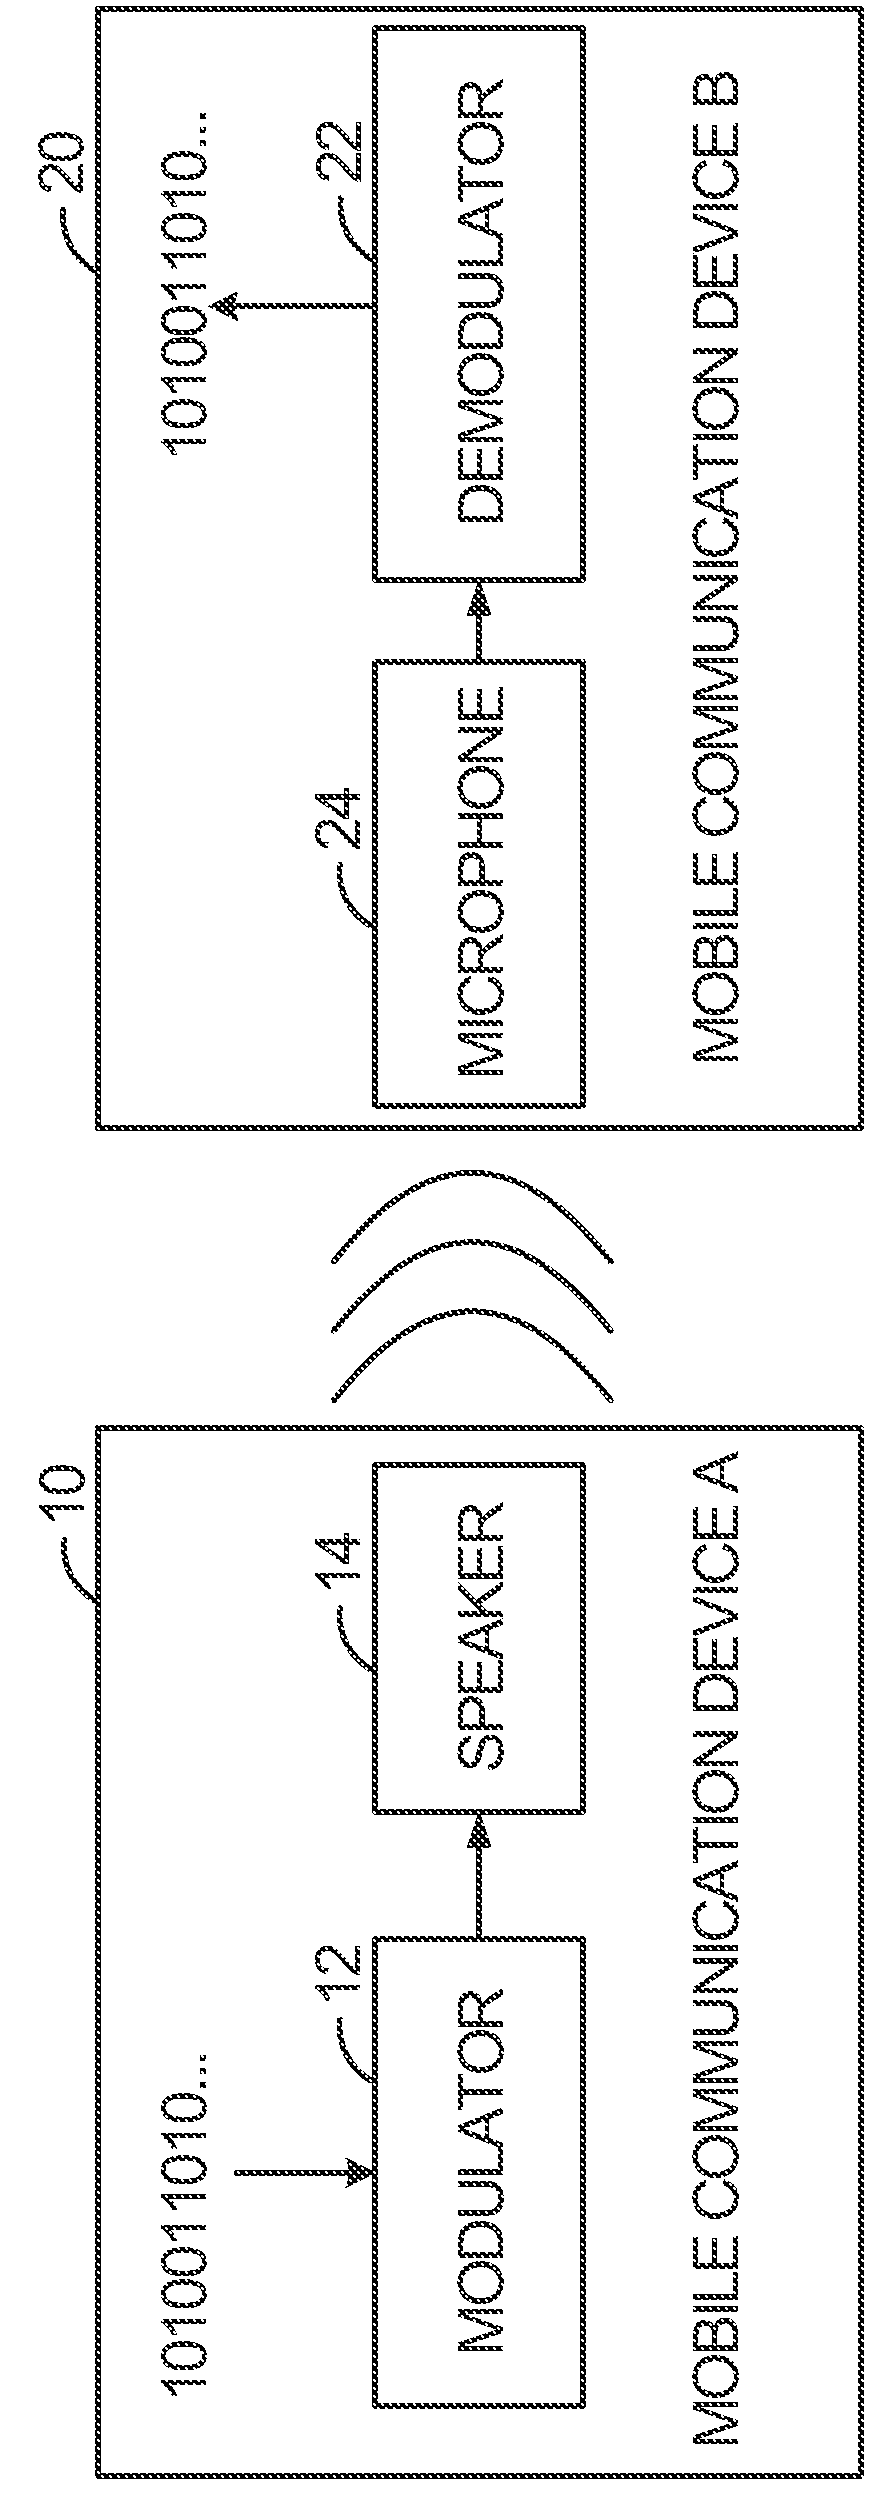 Method and system for implementing near field communication